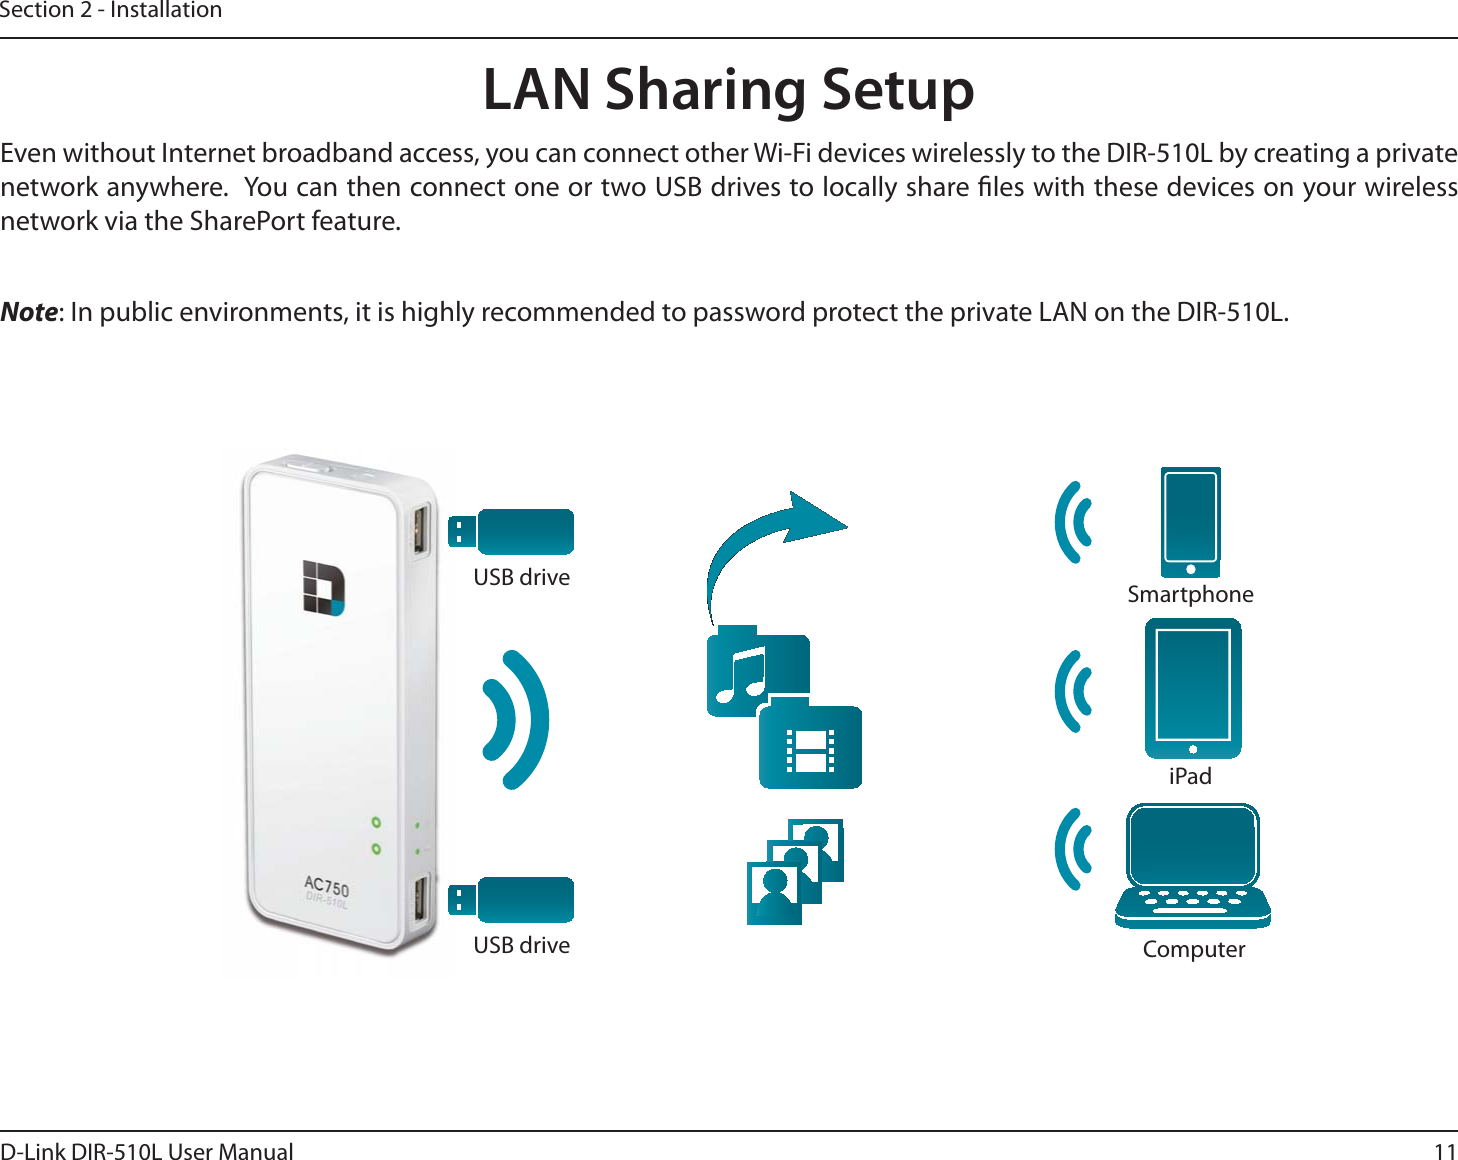 11D-Link DIR-510L User ManualSection 2 - InstallationLAN Sharing SetupEven without Internet broadband access, you can connect other Wi-Fi devices wirelessly to the DIR-510L by creating a private network anywhere.  You can then connect one or two USB drives to locally share les with these devices on your wireless network via the SharePort feature.  Note: In public environments, it is highly recommended to password protect the private LAN on the DIR-510L.ComputeriPadSmartphoneUSB driveUSB drive